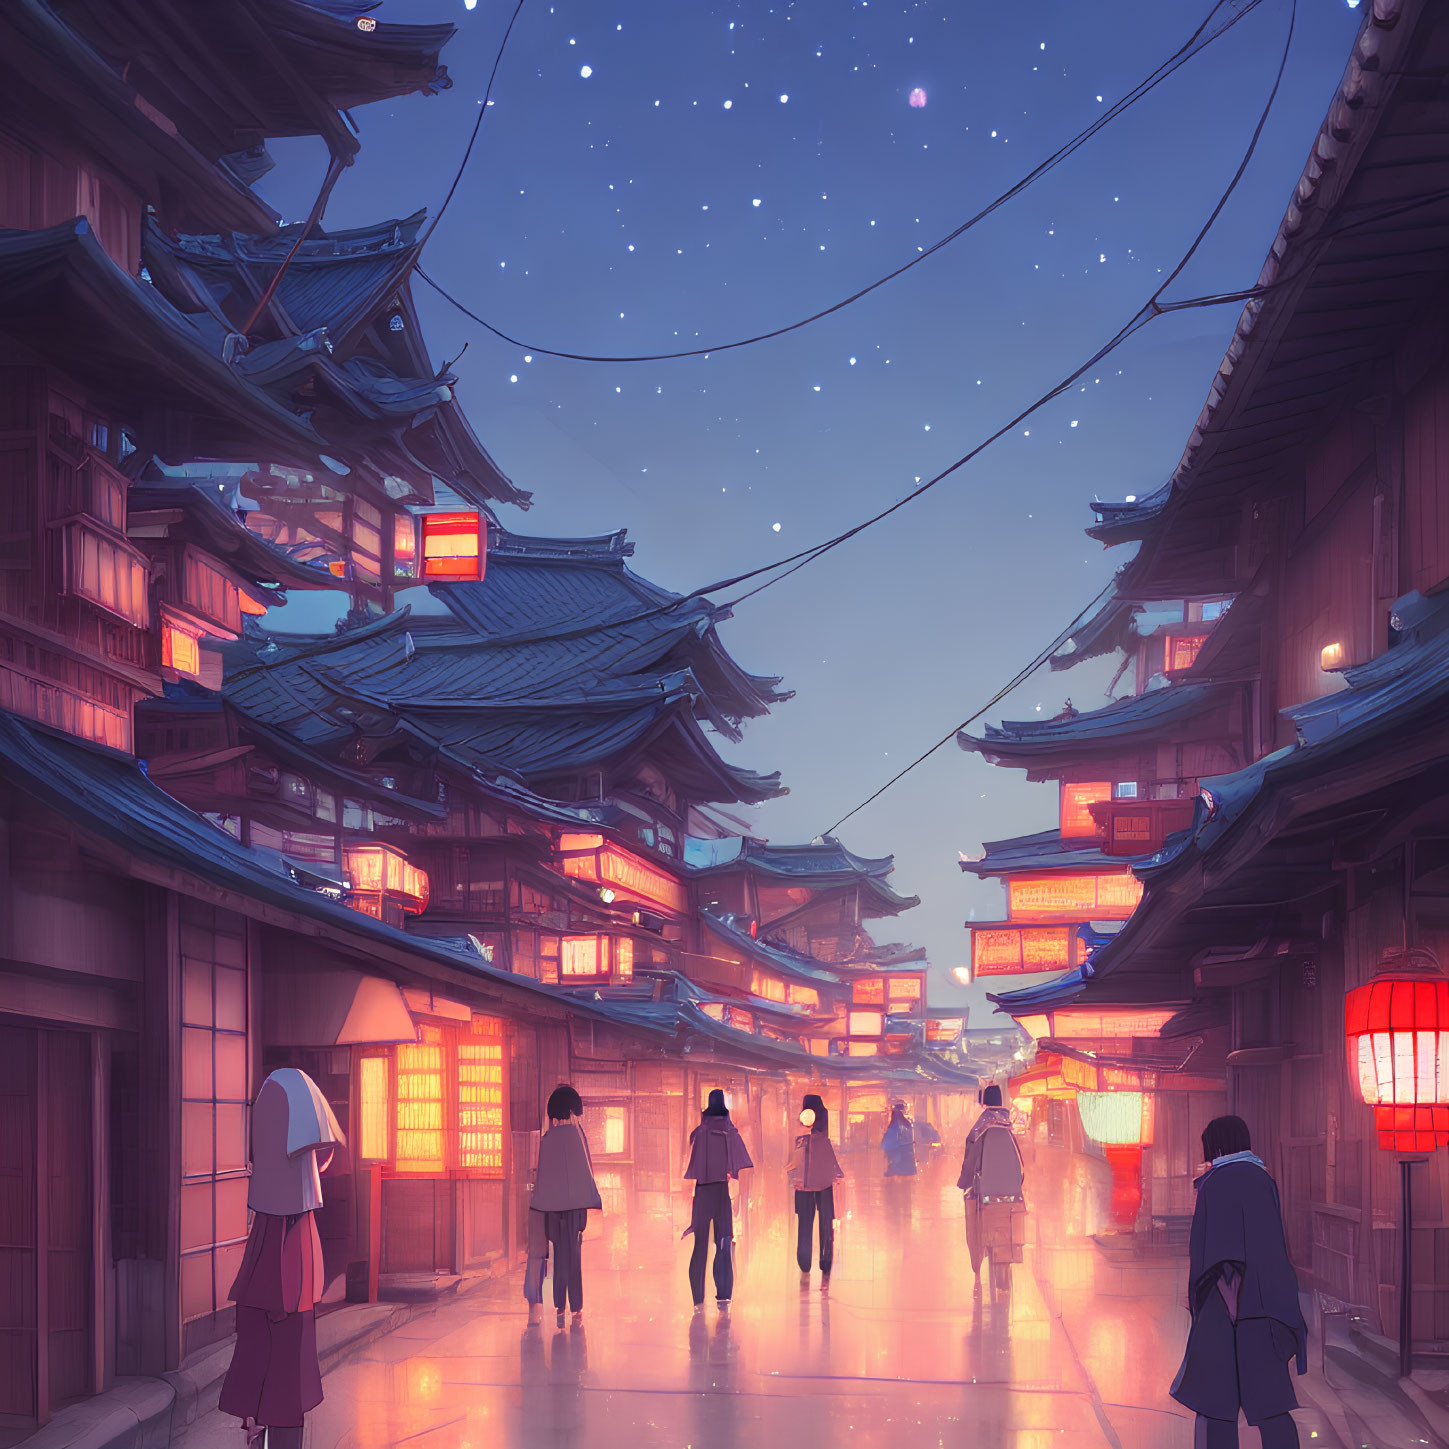 Tranquil Asian-inspired town at twilight with traditional buildings and hanging lanterns